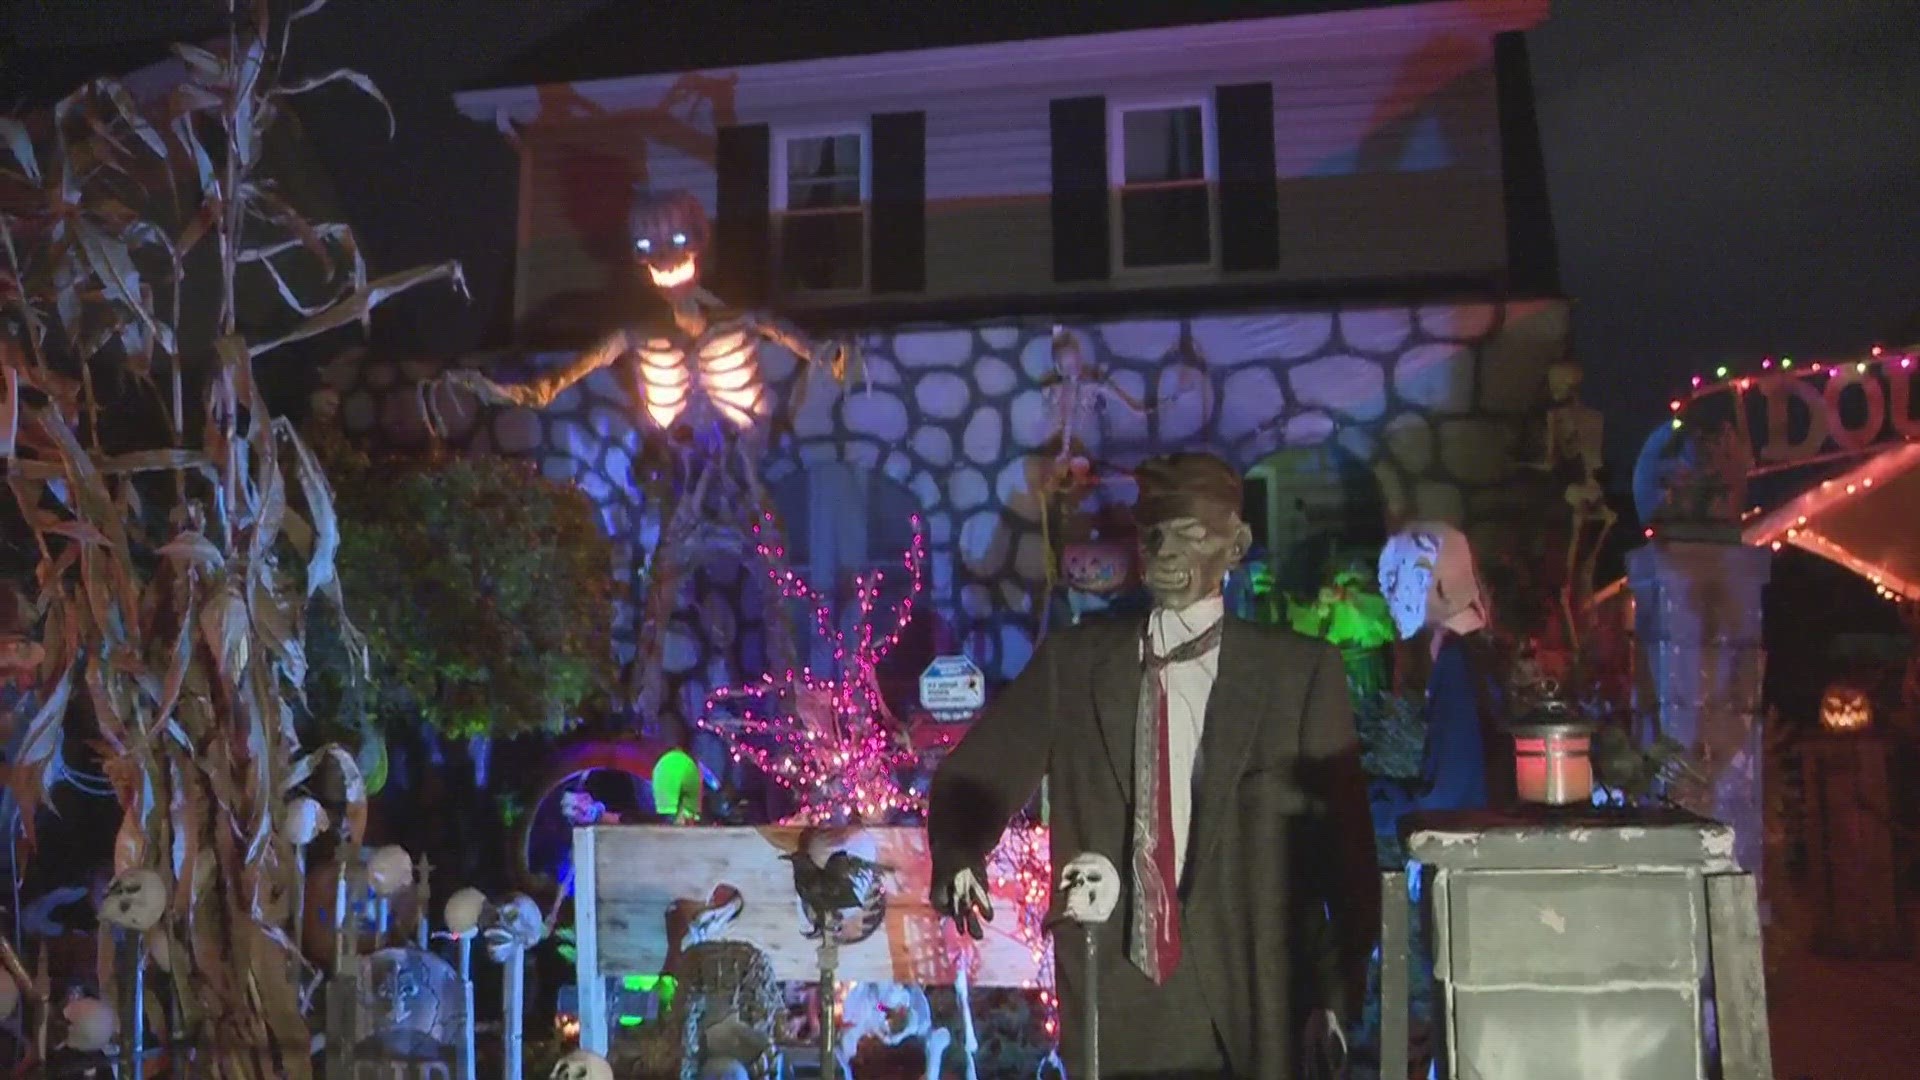 Check out this awesome Halloween display with spooky decorations at a home on Lincoln Avenue in Parma, Ohio.